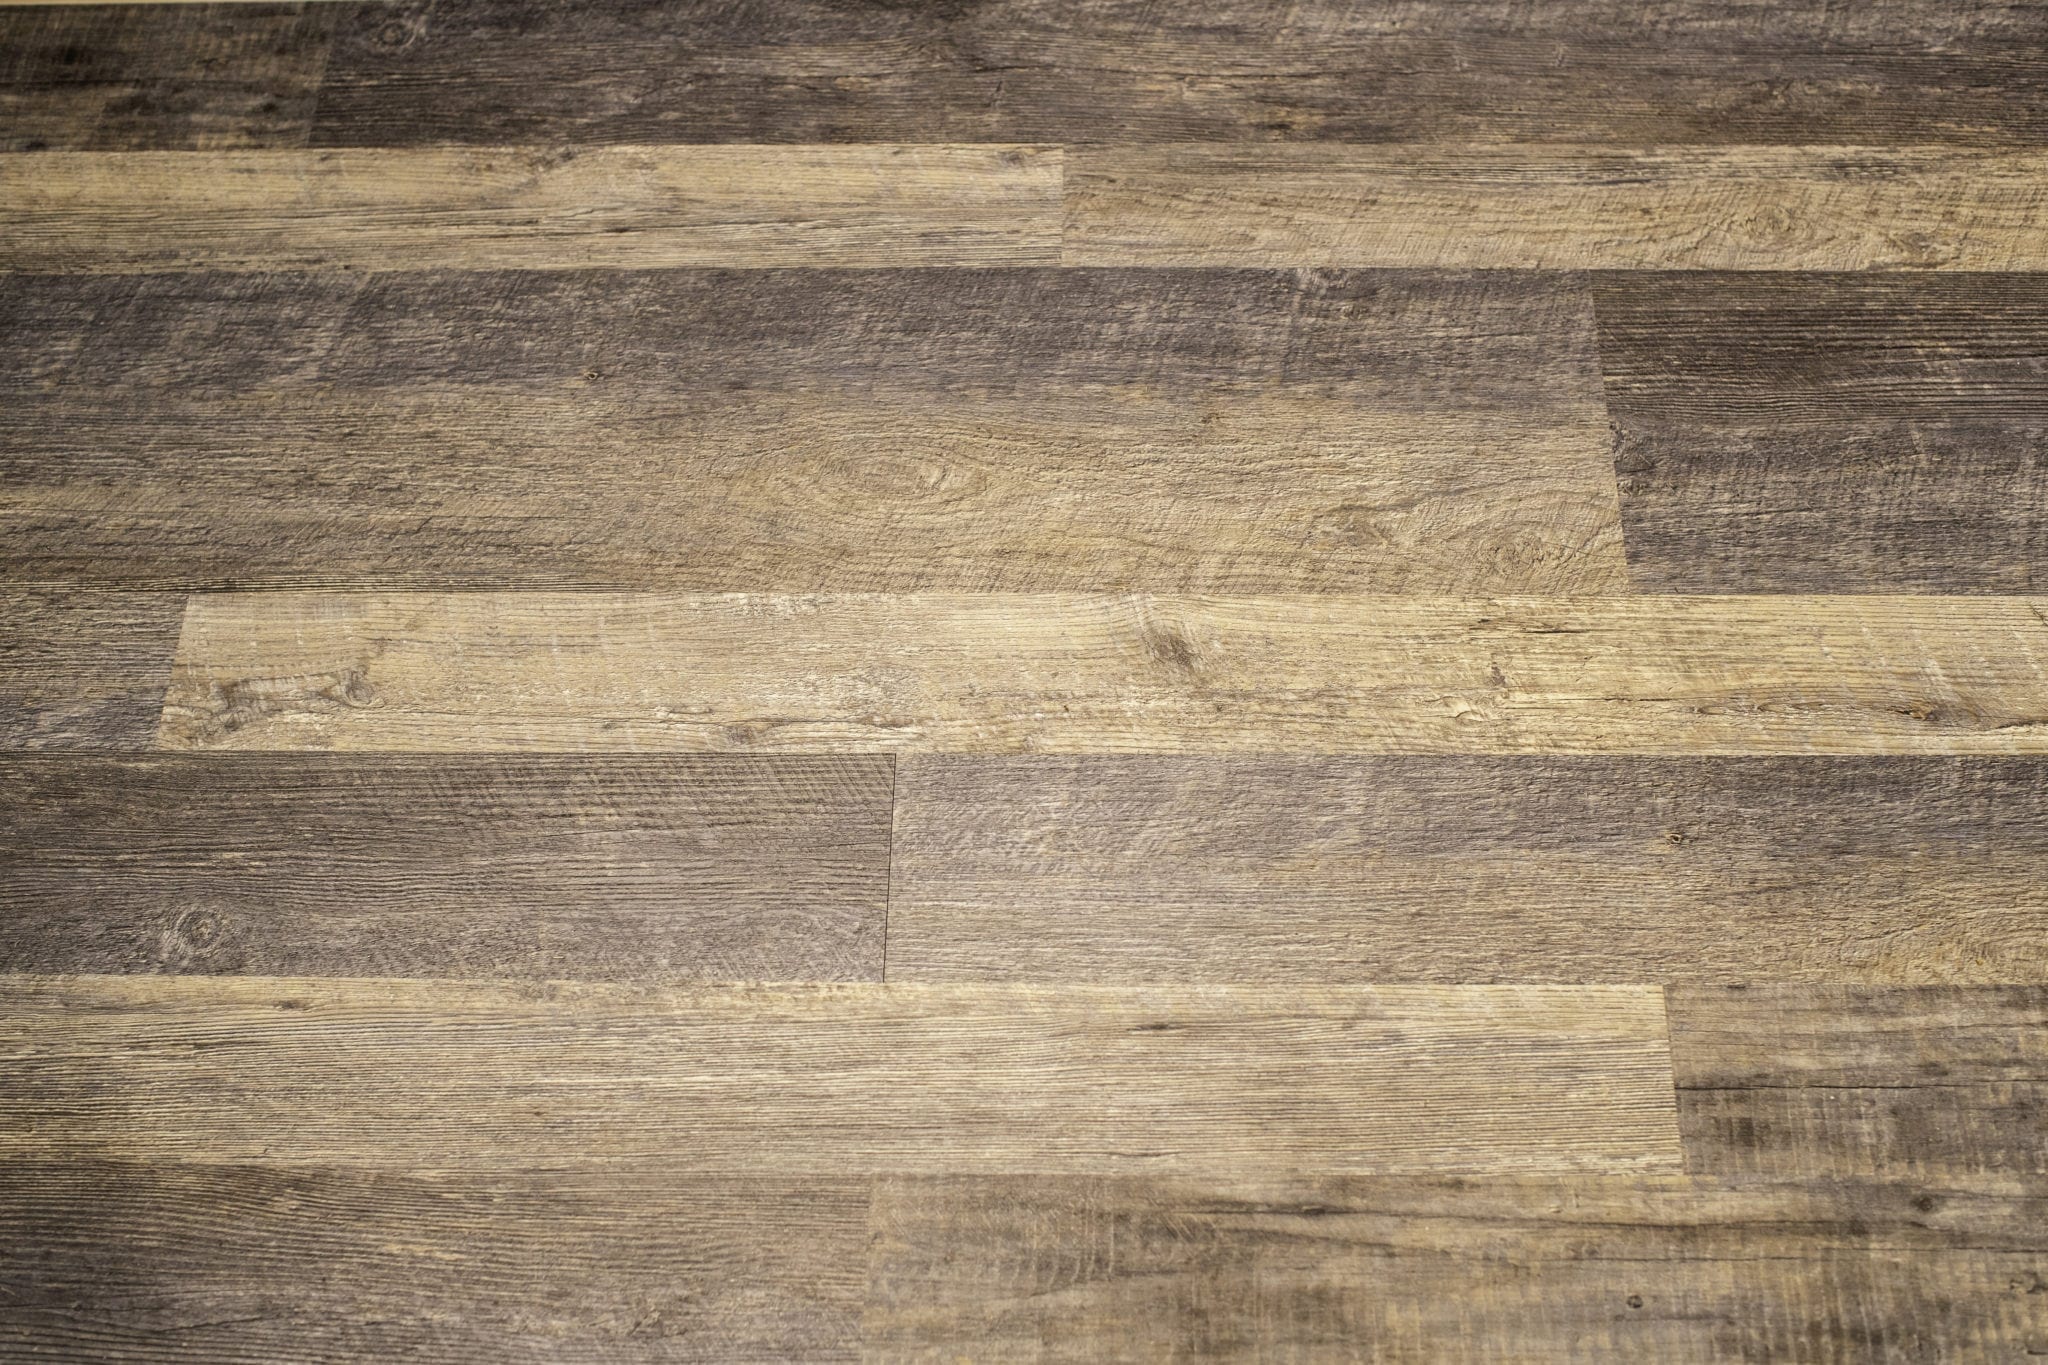 Installing vinyl flooring that looks like hardwood. Tips and tricks to do it right.